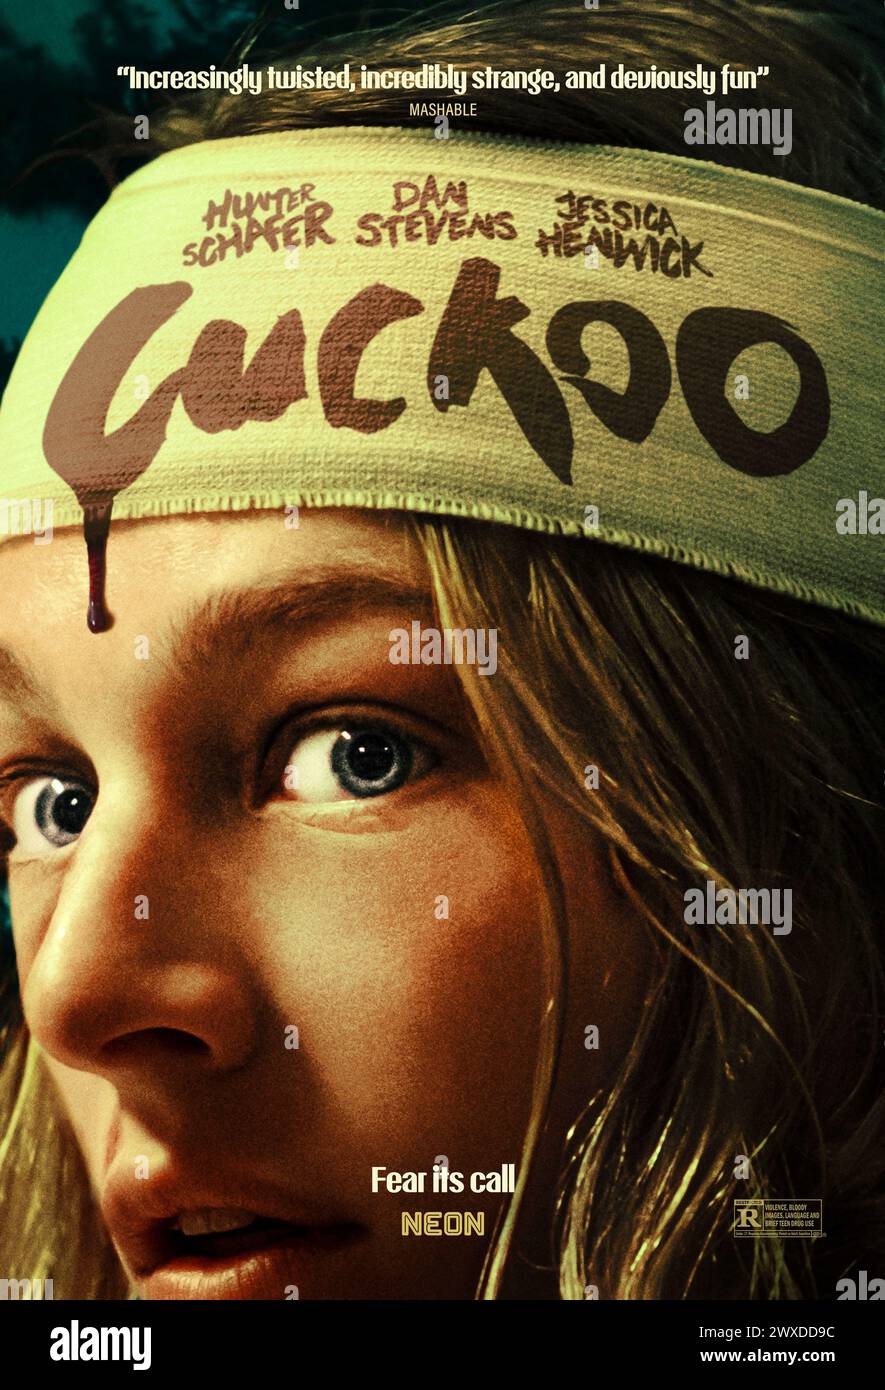 Cuckoo (2024) directed by Tilman Singer and starring Hunter Schafer, Dan Stevens and Jessica Henwick. A 17-year old girl is forced to move with her family to a resort where things are not what they seem. US one sheet poster.***EDITORIAL USE ONLY*** Credit: BFA / Neon Stock Photo